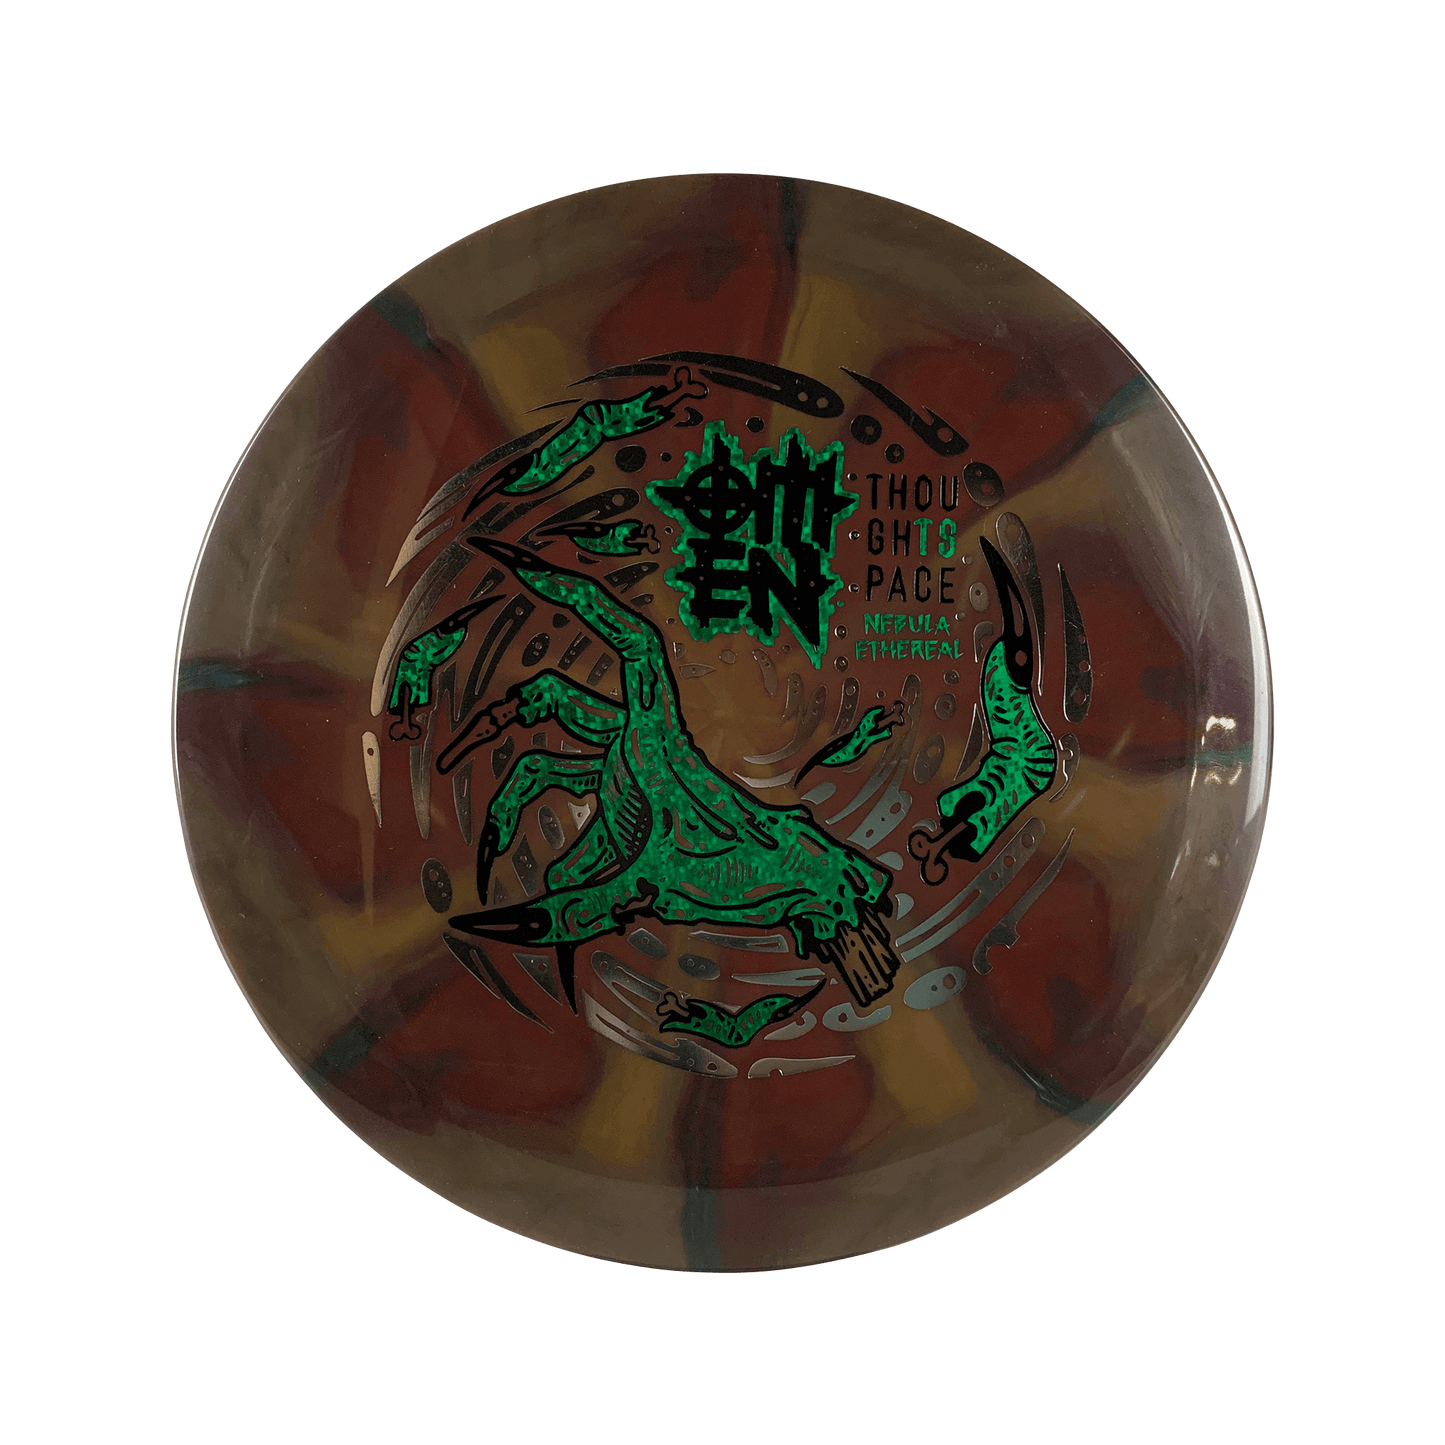 Nebula Ethereal Omen Disc Thought Space Athletics multi / brown 172 